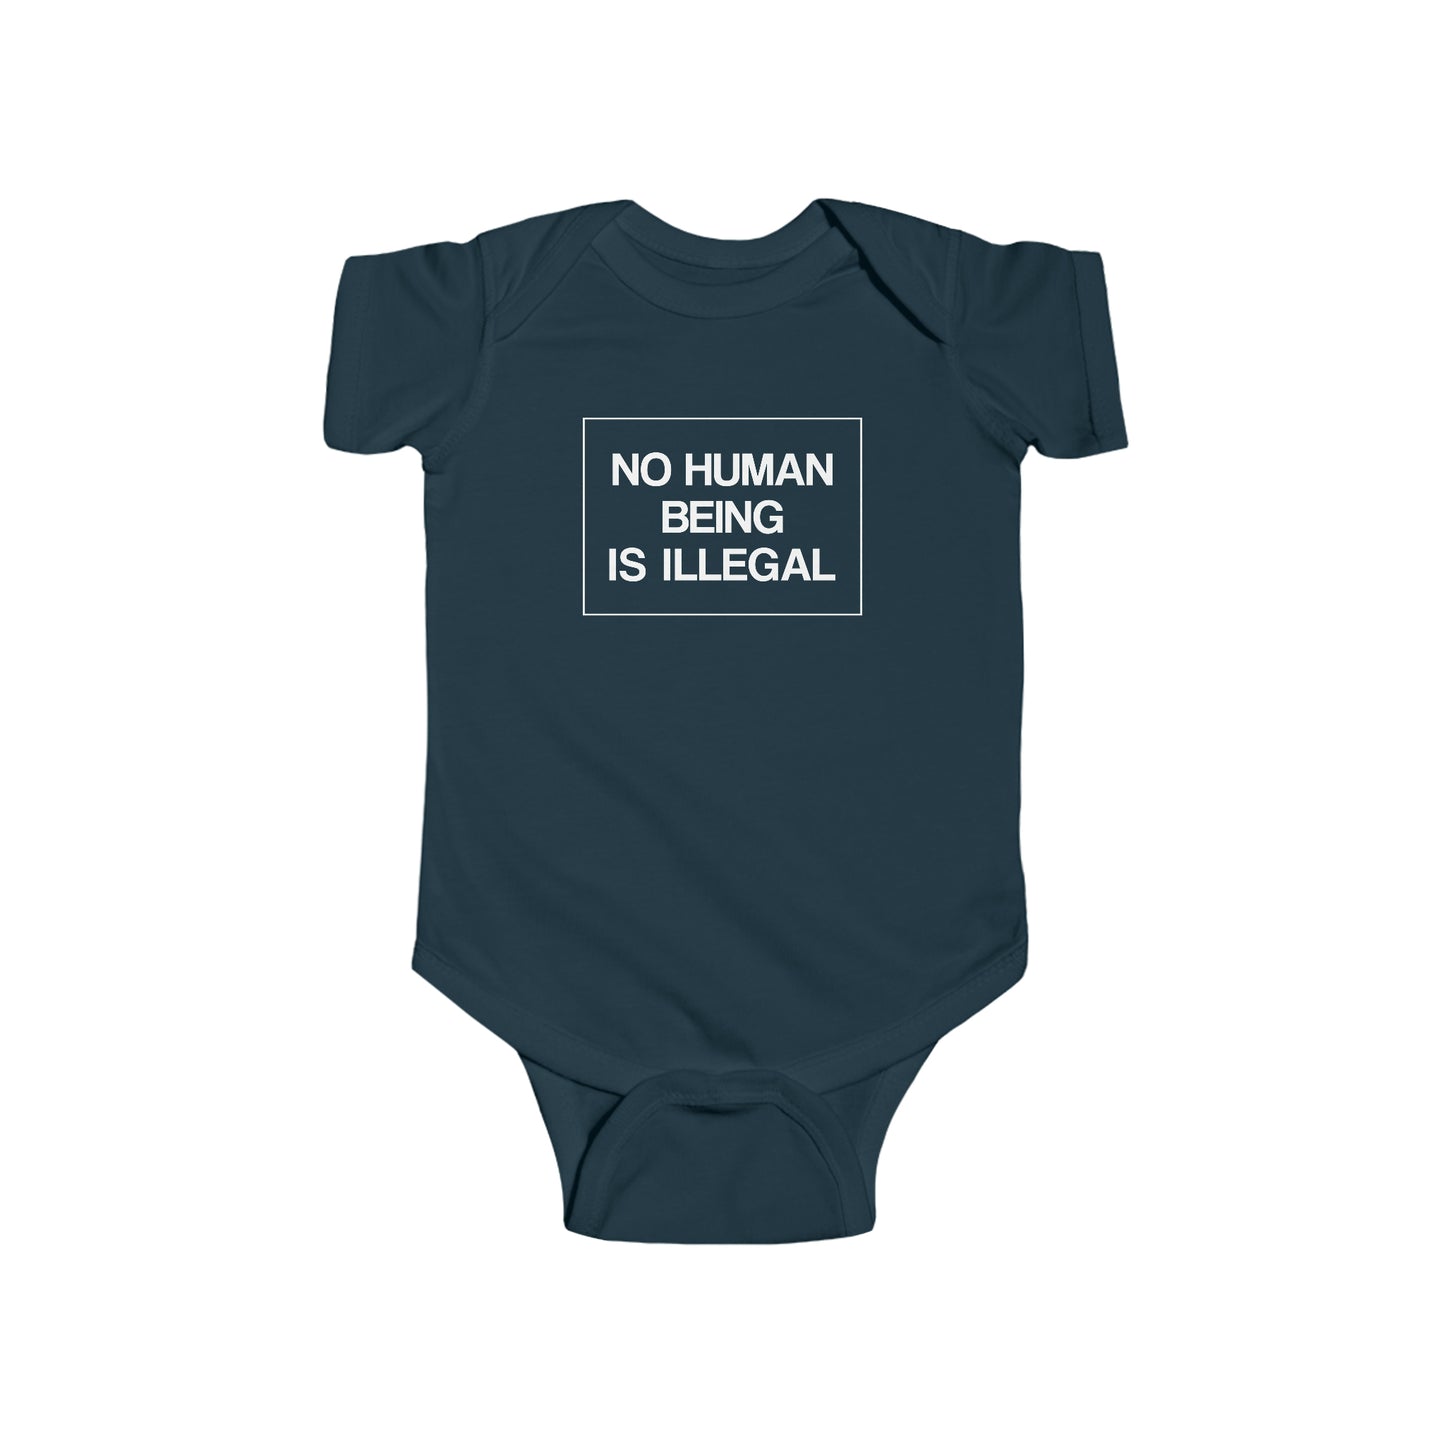 “No Human Being is Illegal” Infant Onesie